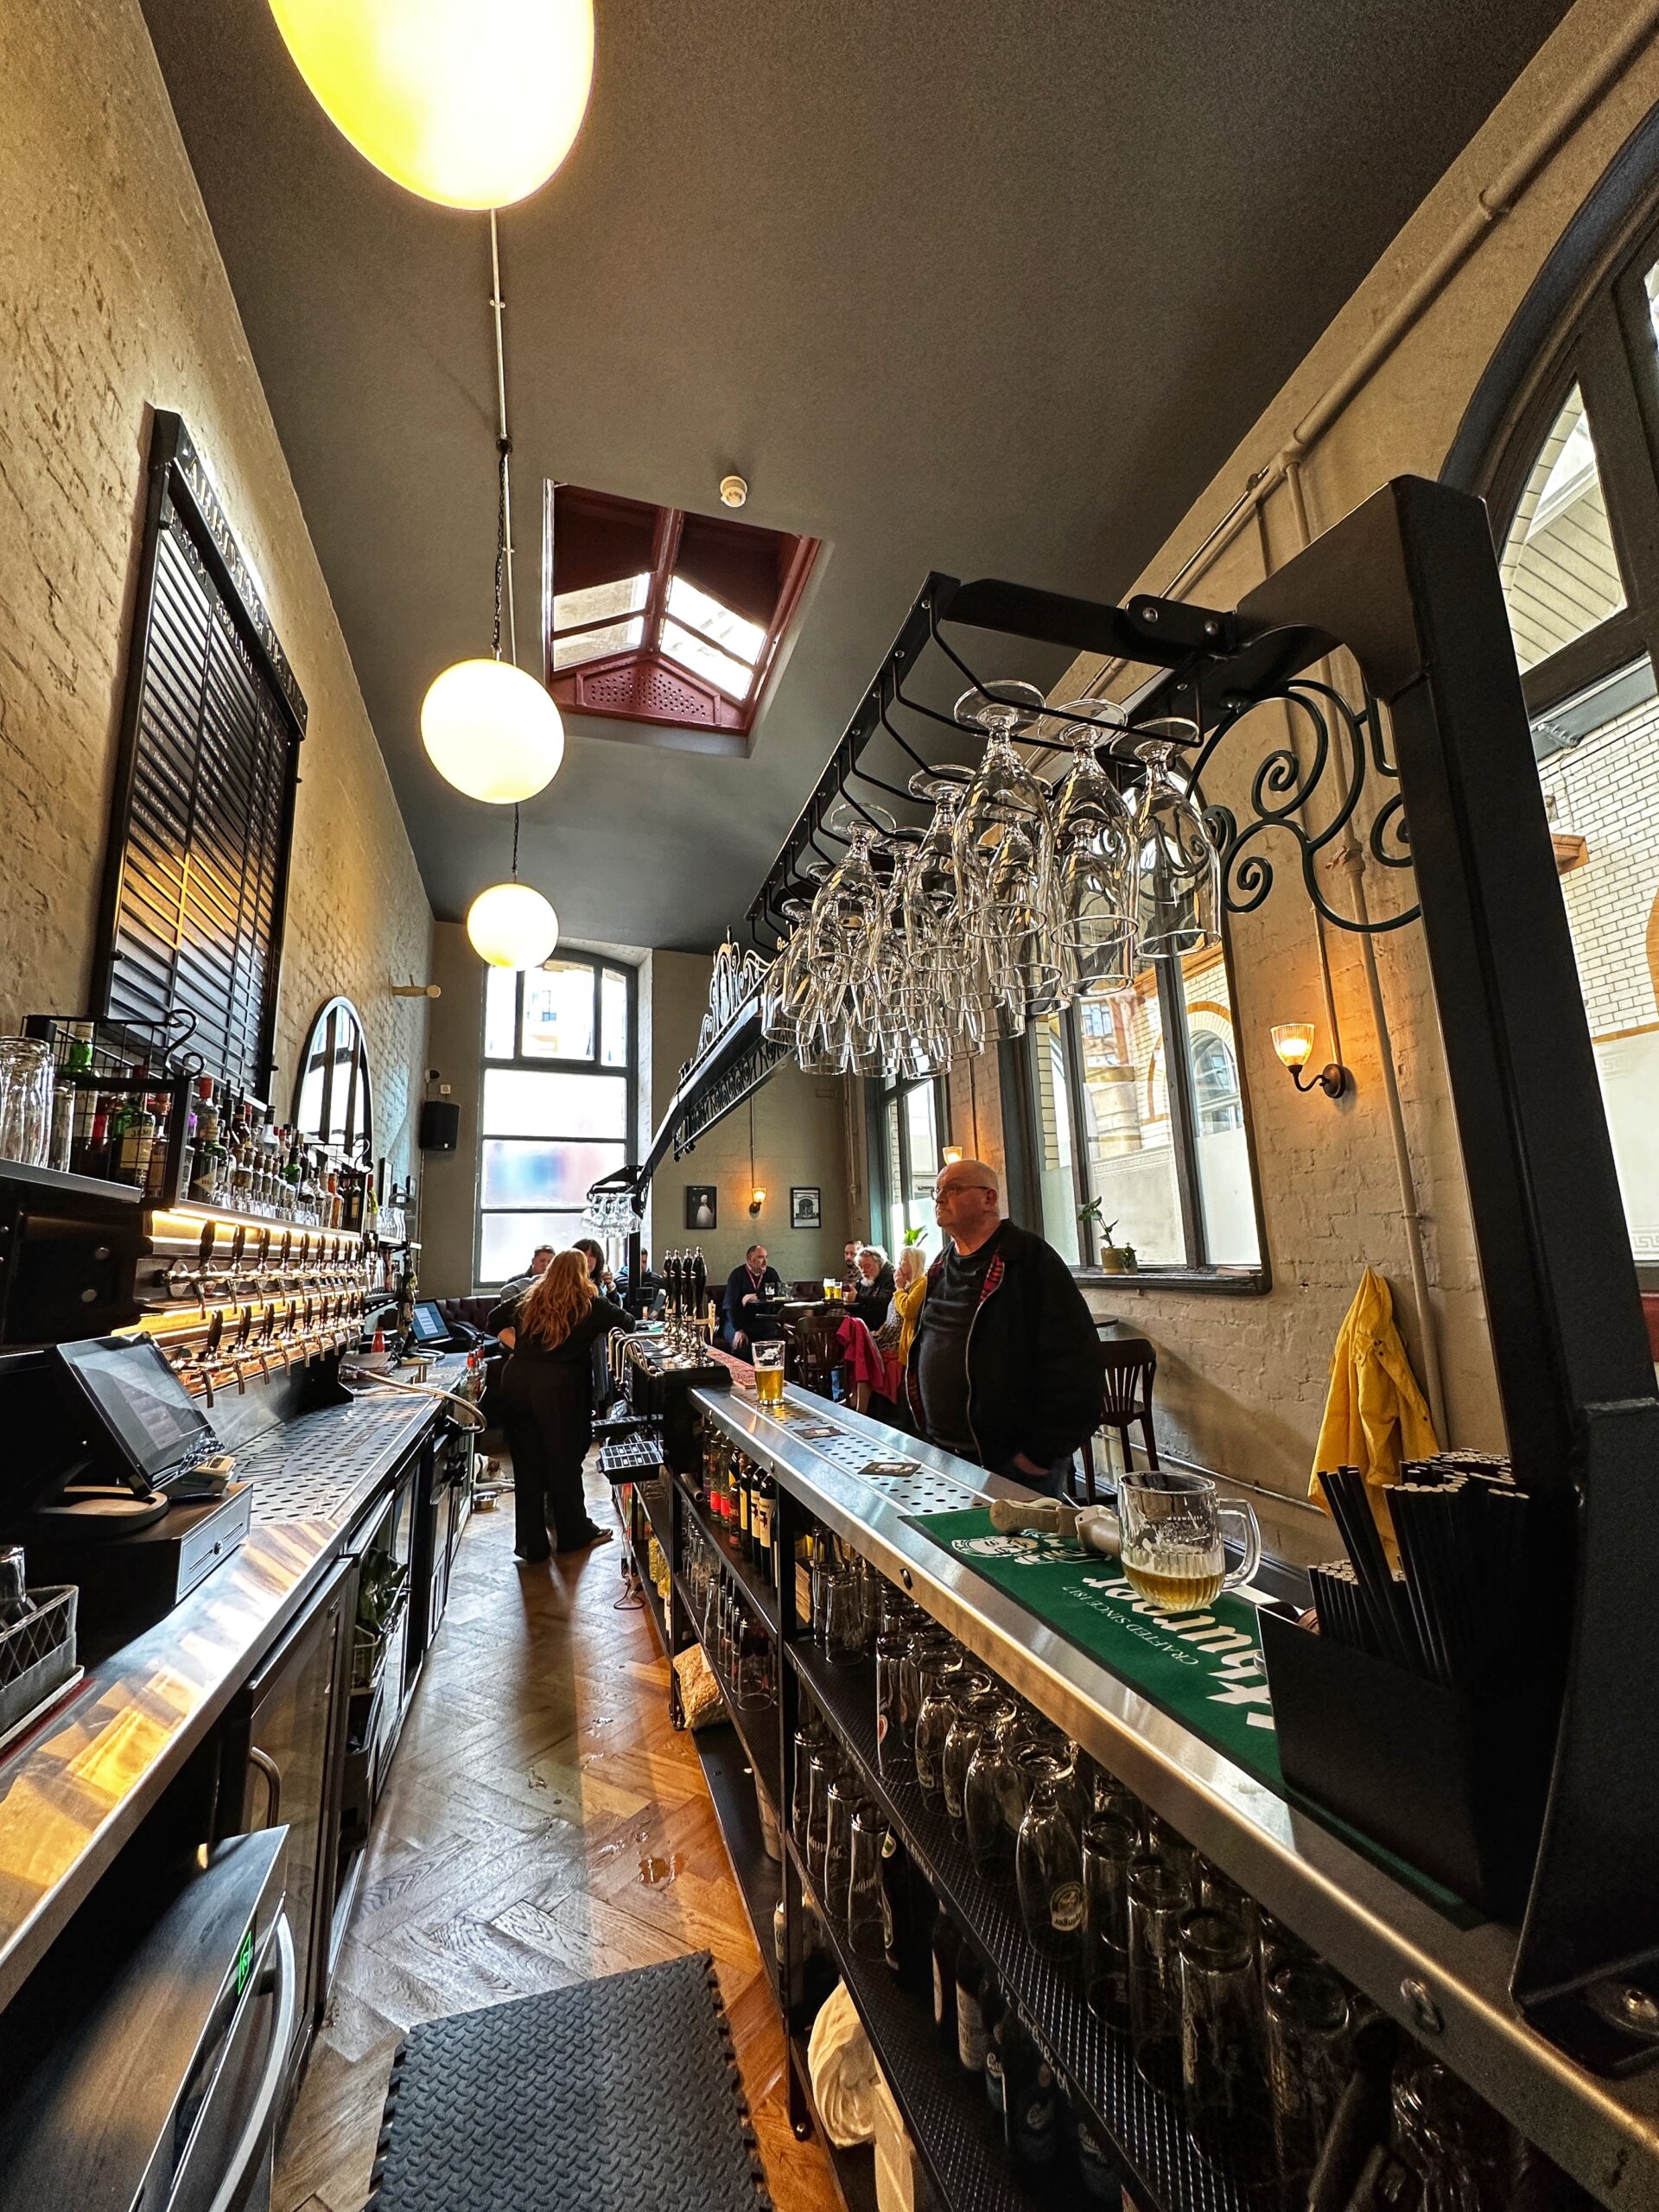 The Victoria Tap is a micro pub a stone's throw from the Manchester Christmas Markets